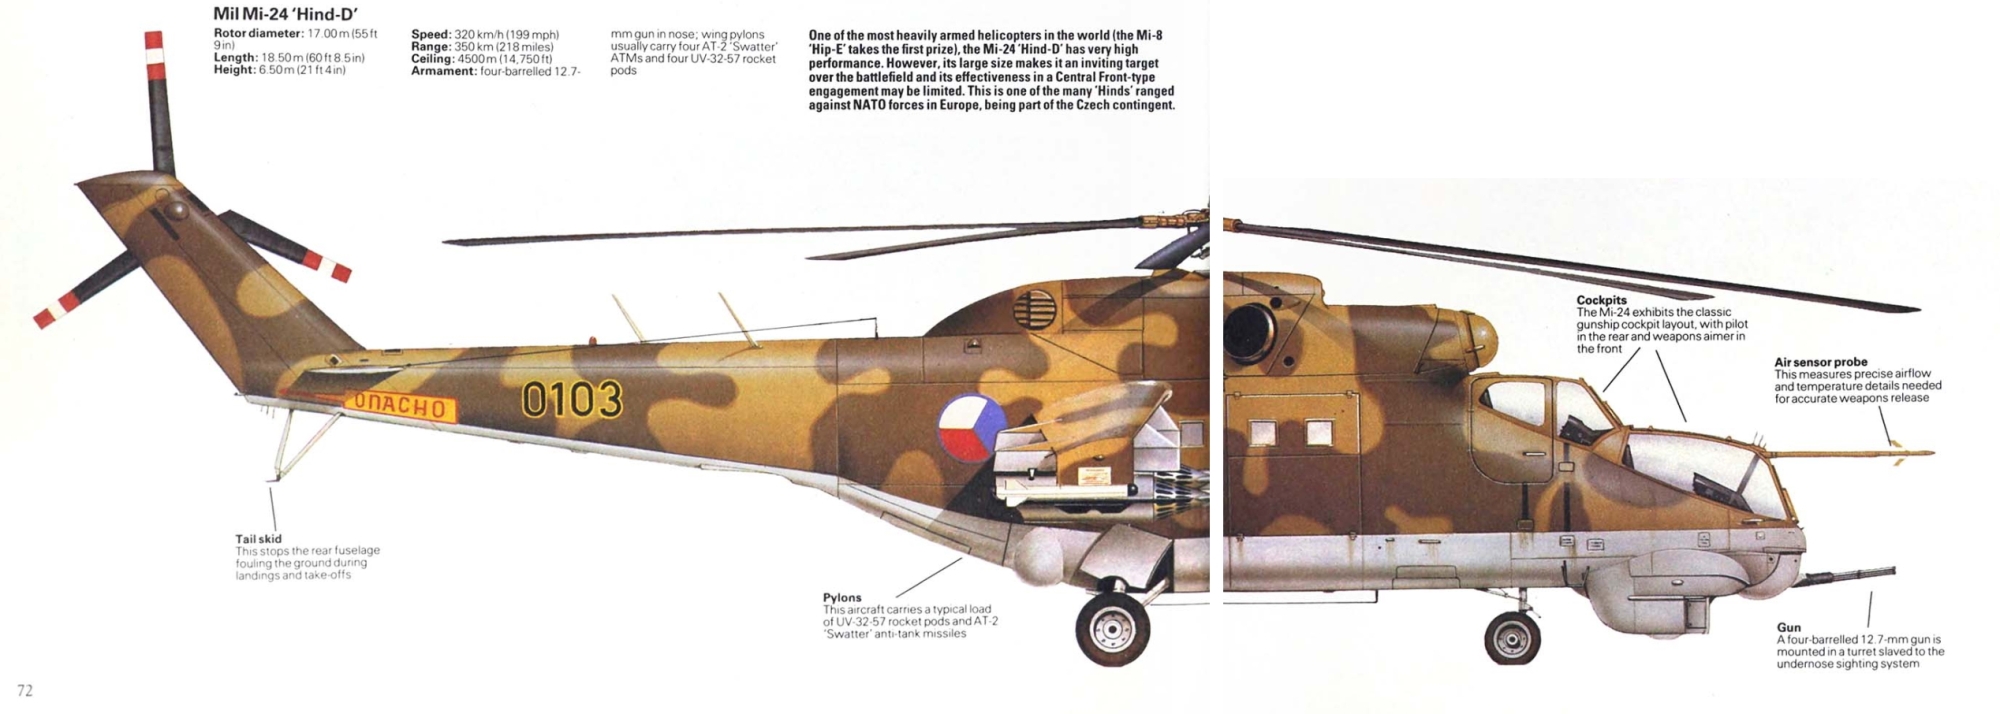 Cold War – Soviet Helicopters II